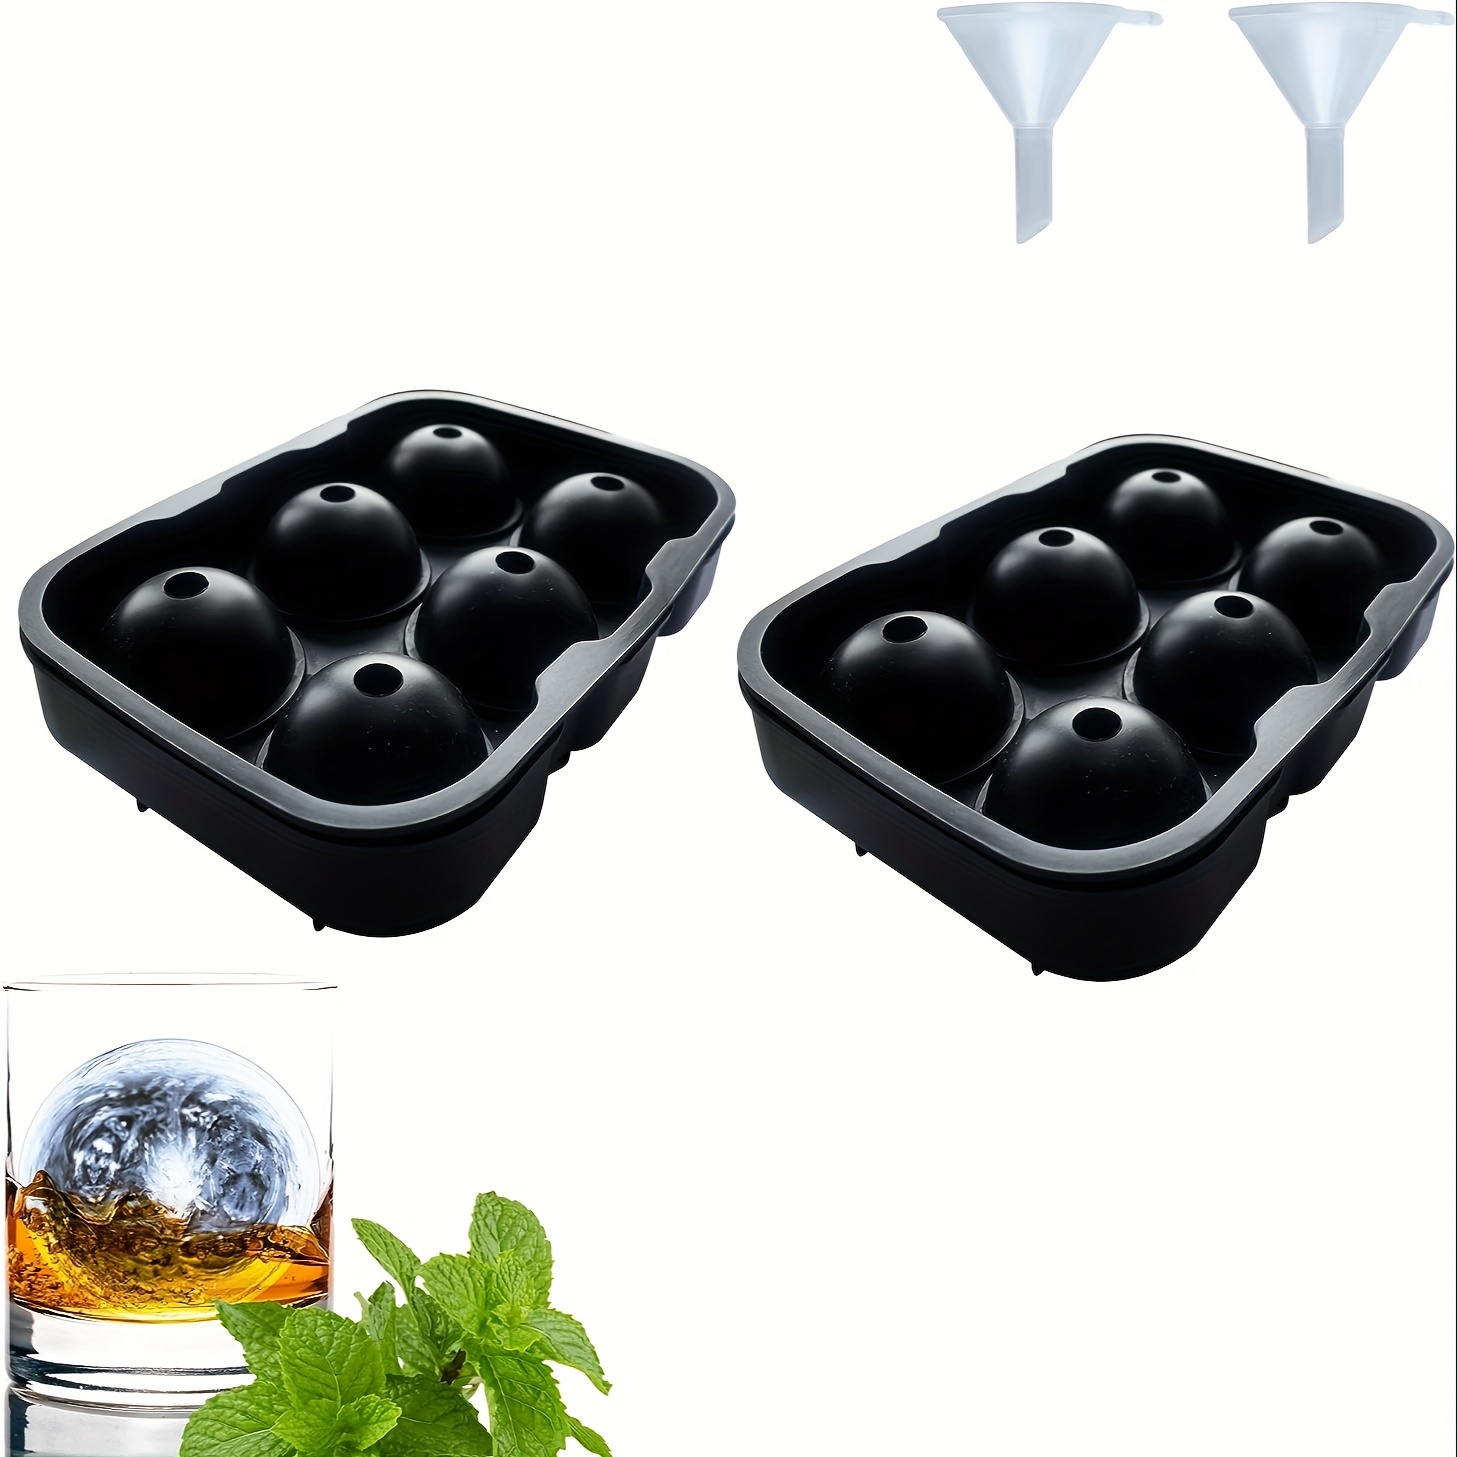 6 Grid Round Square Ice Cube Ball Large Ice Cube Maker For Whiskey